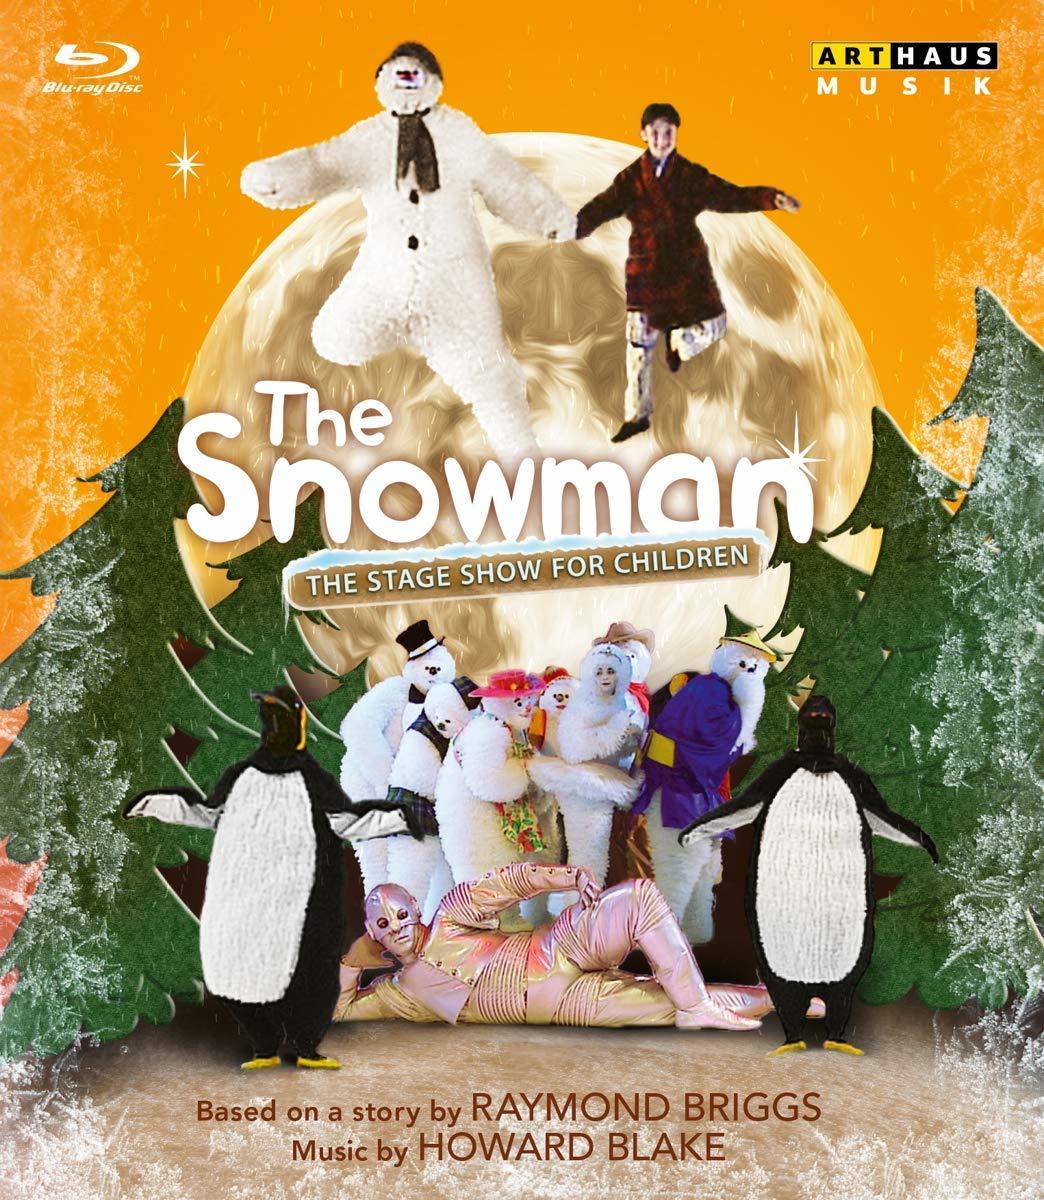 The Snowman: The Stage Show for Children Blu-ray (United Kingdom)